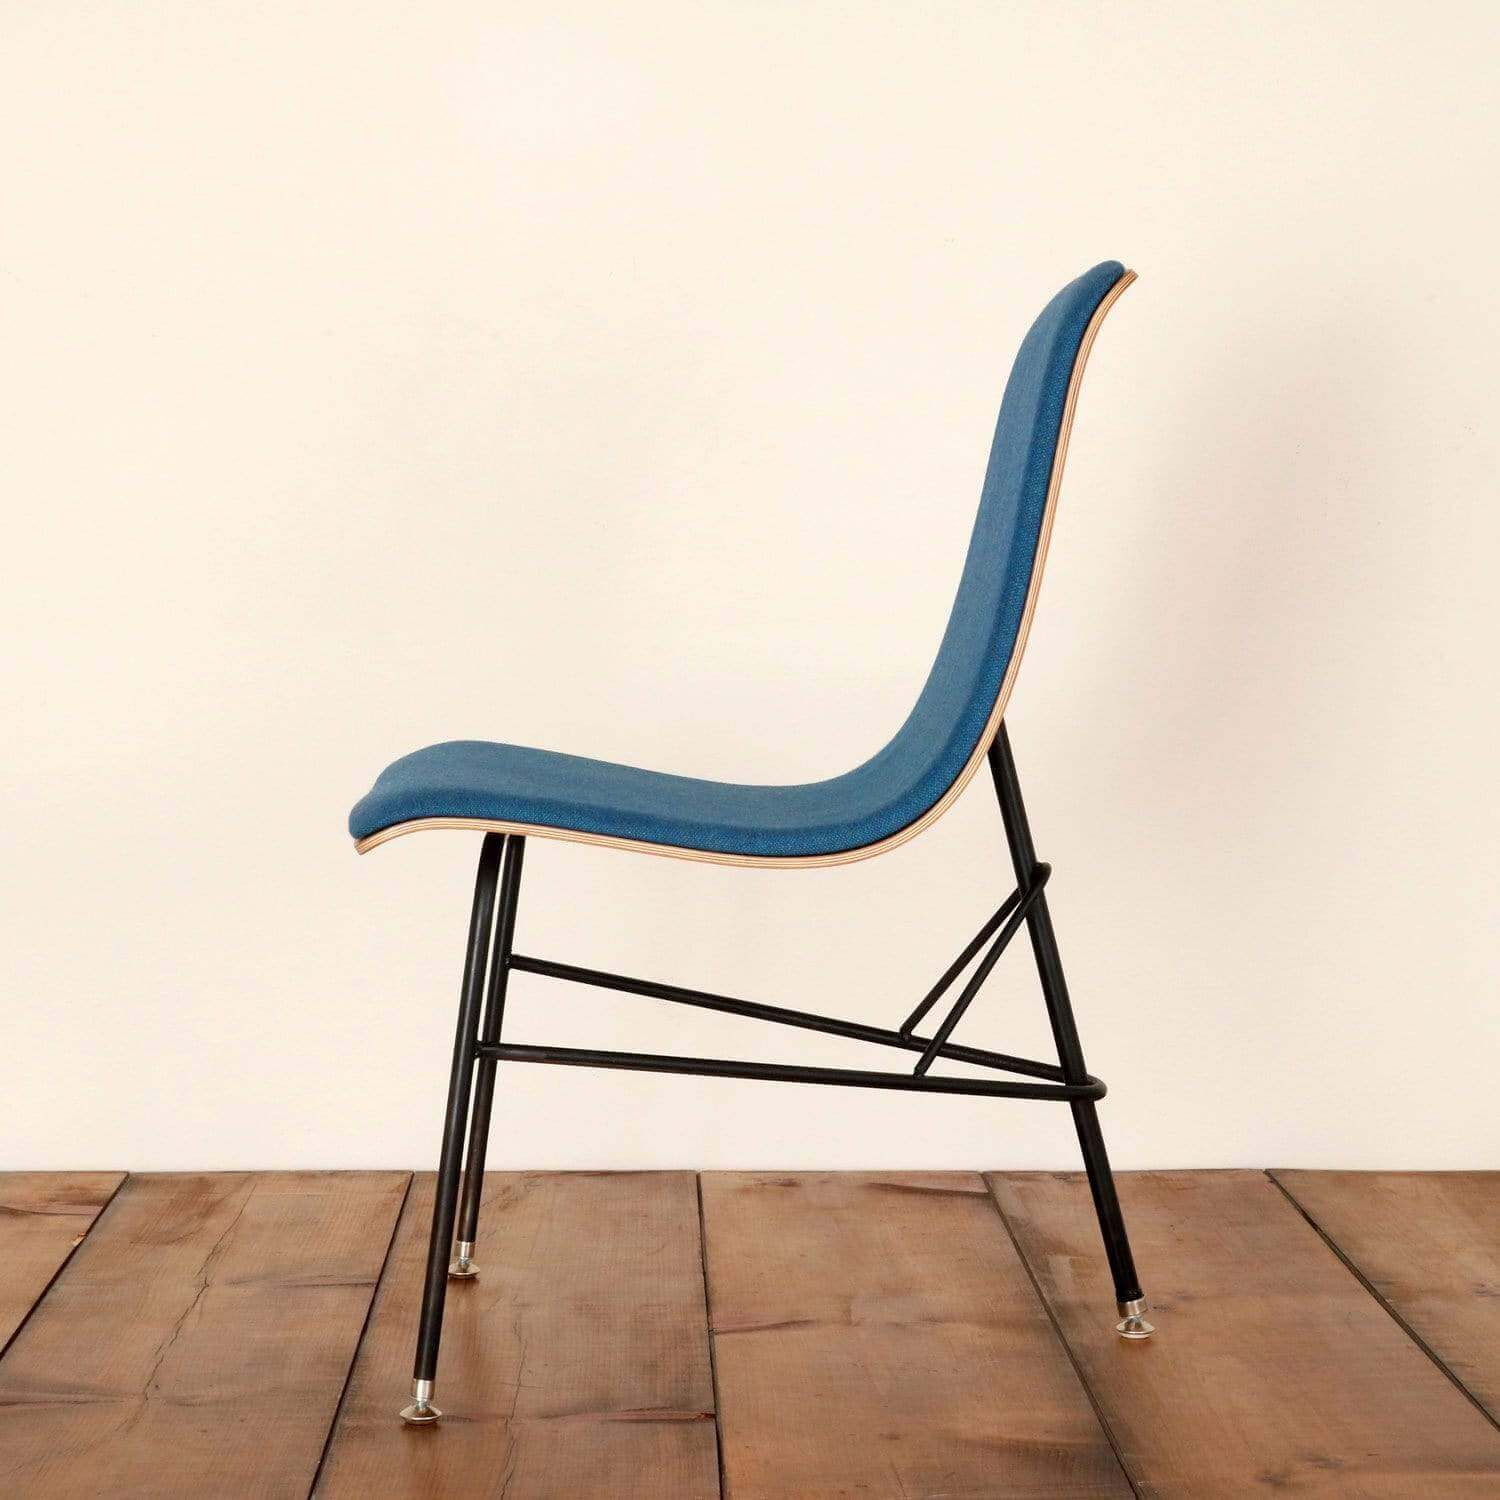 Fully upholstered tripod chair